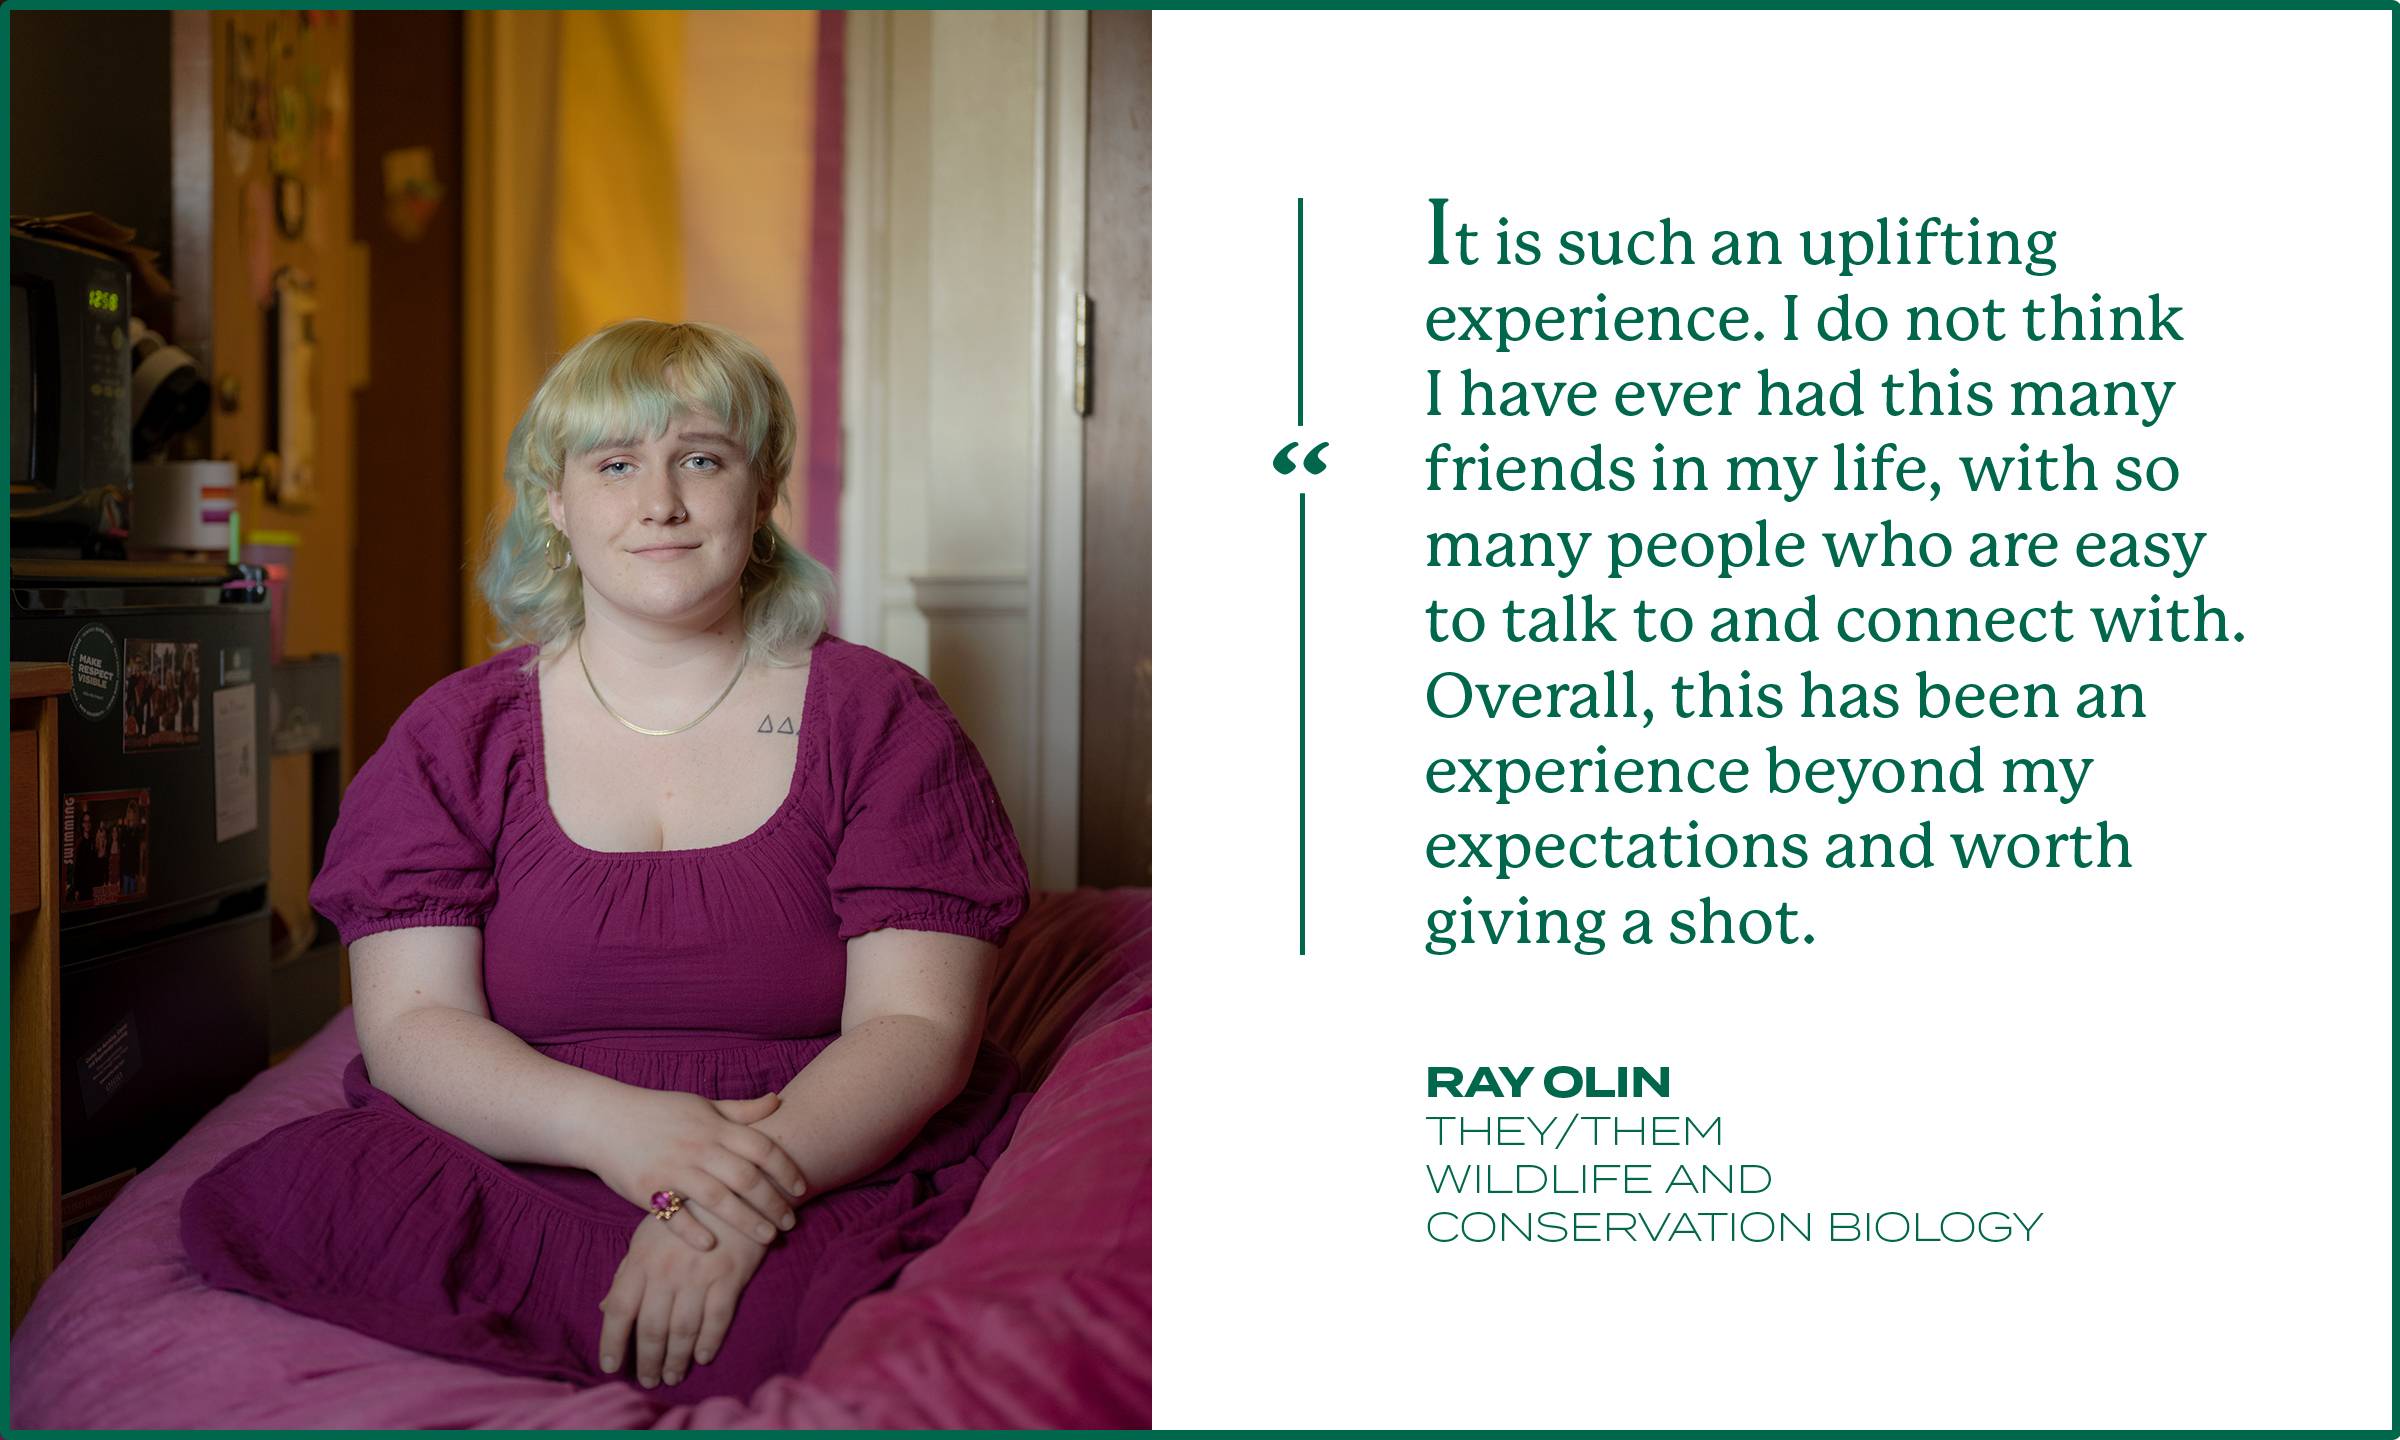 Ray Olin (they/them) is a wildlife and conservation biology major